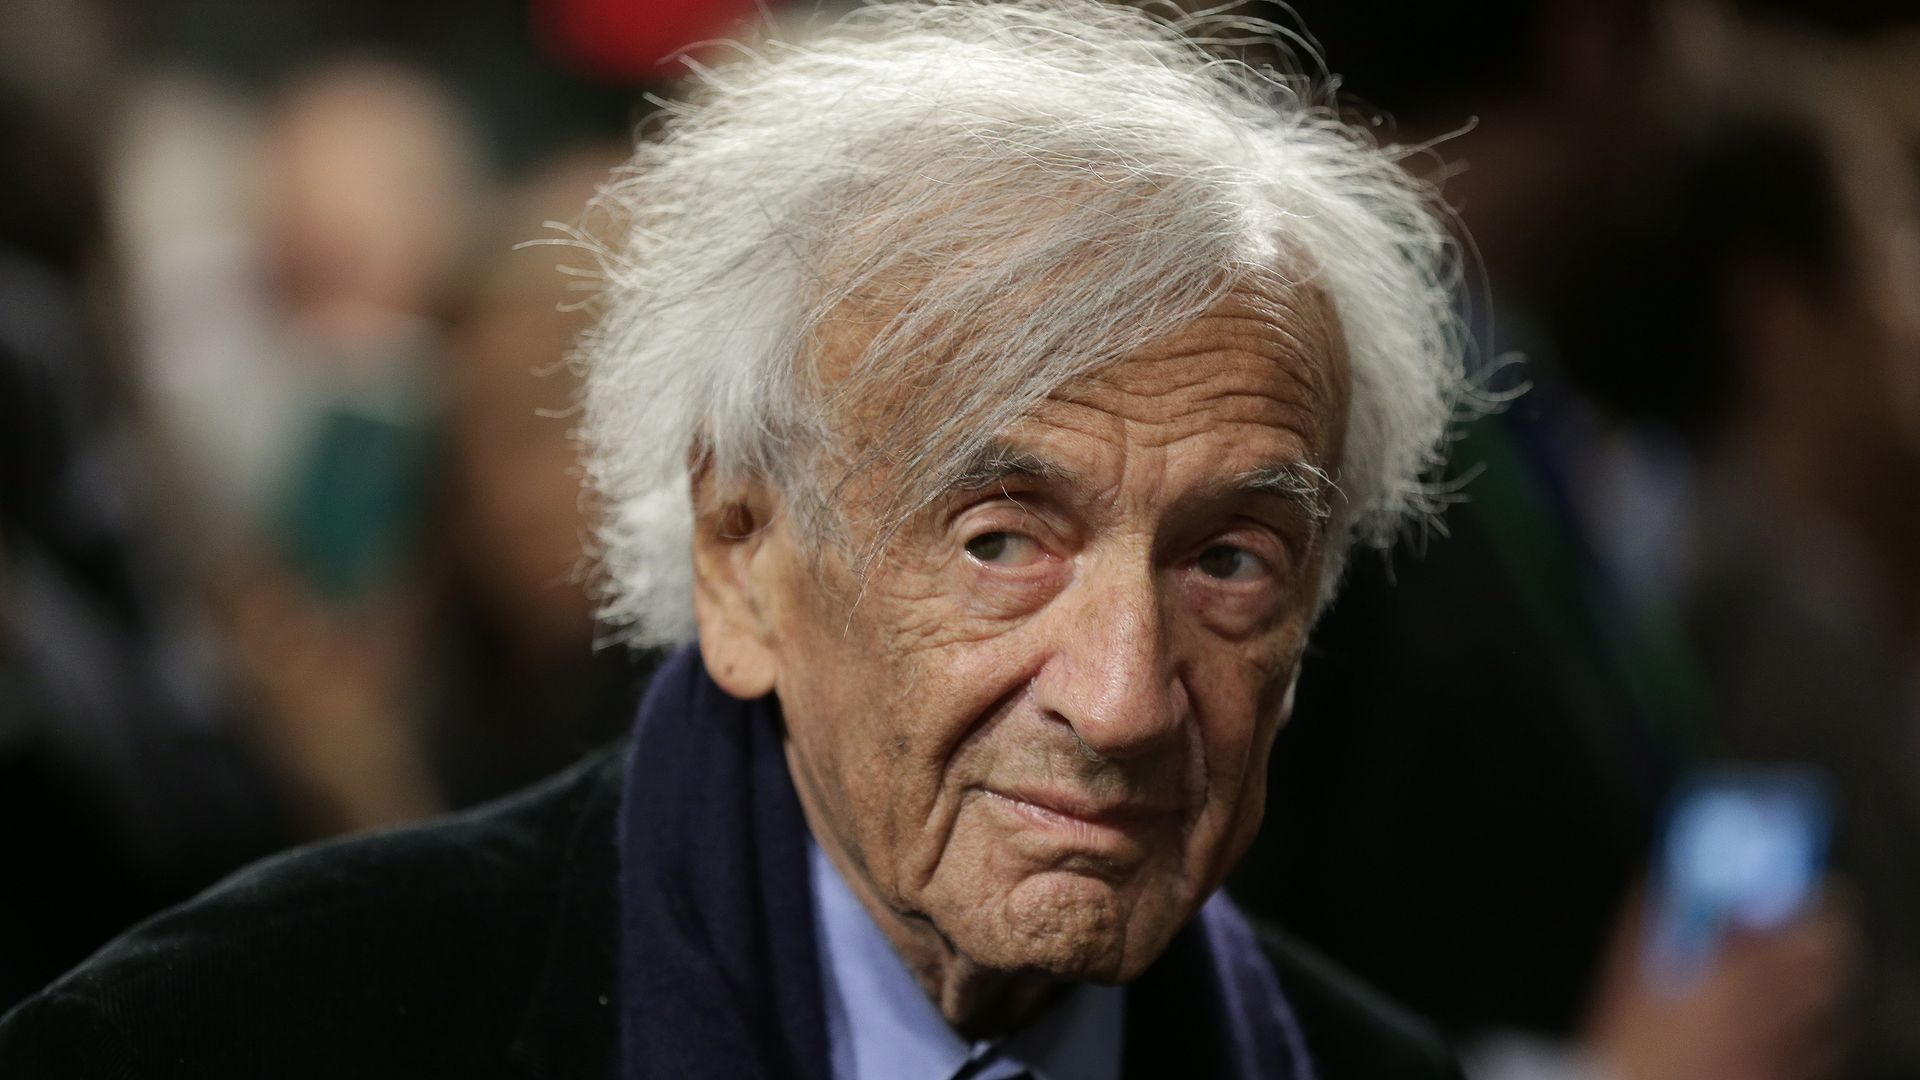 Nobel Peace Laureate Elie Wiesel arrives for a roundtable discussion on Capitol Hill in March 2015 in Washington.